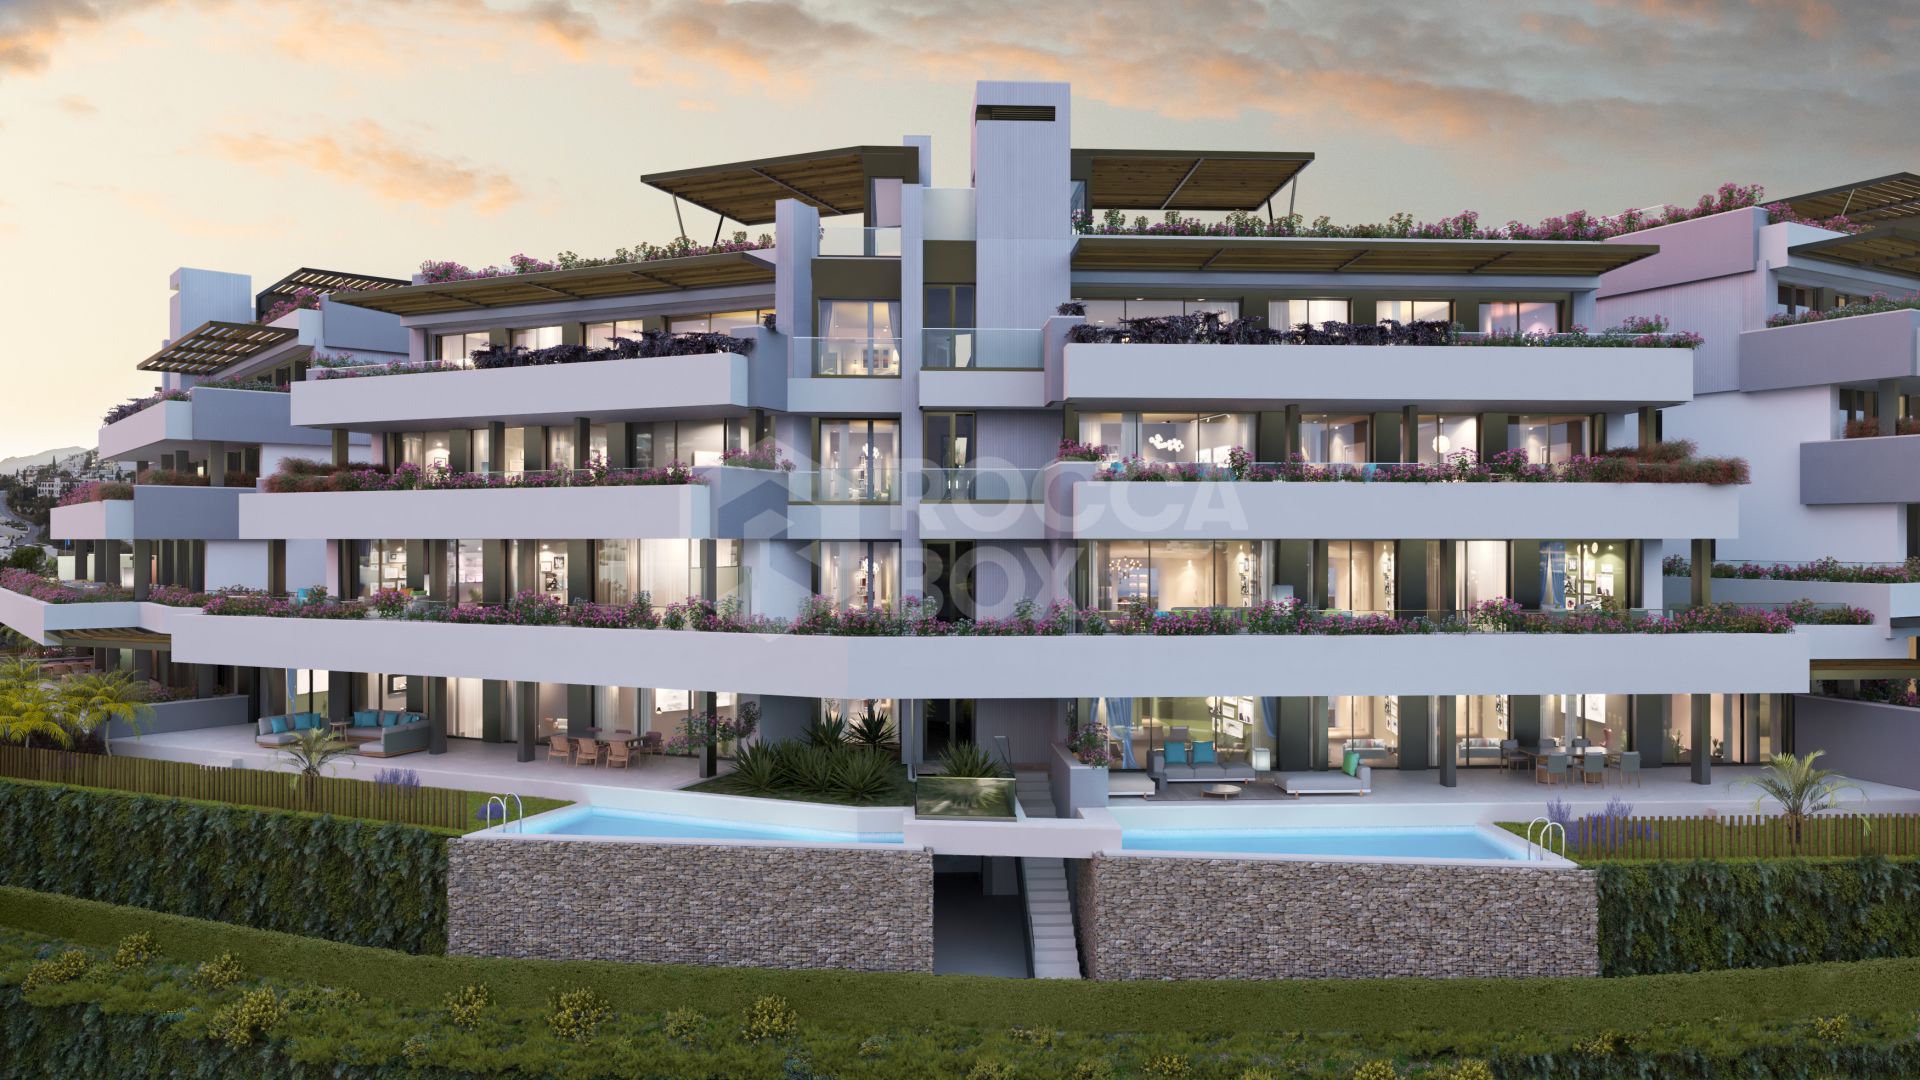 Fantastic complex of 3 and 4 bedroom apartments with panoramic sea views over the Golf Valley